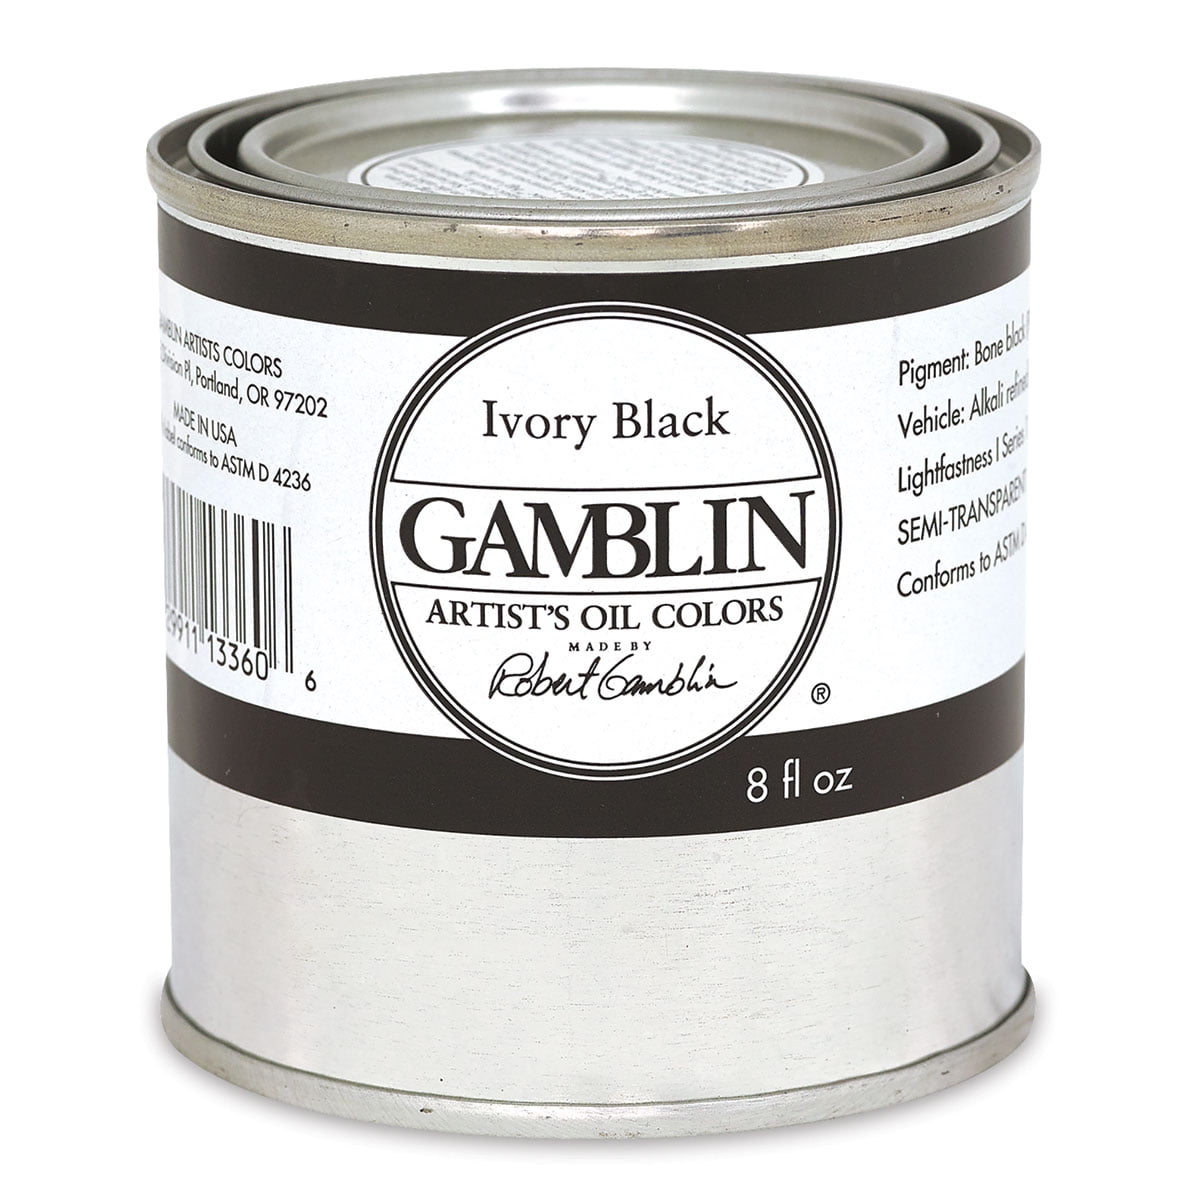 Which black oil color should I paint with? - Gamblin Artists Colors